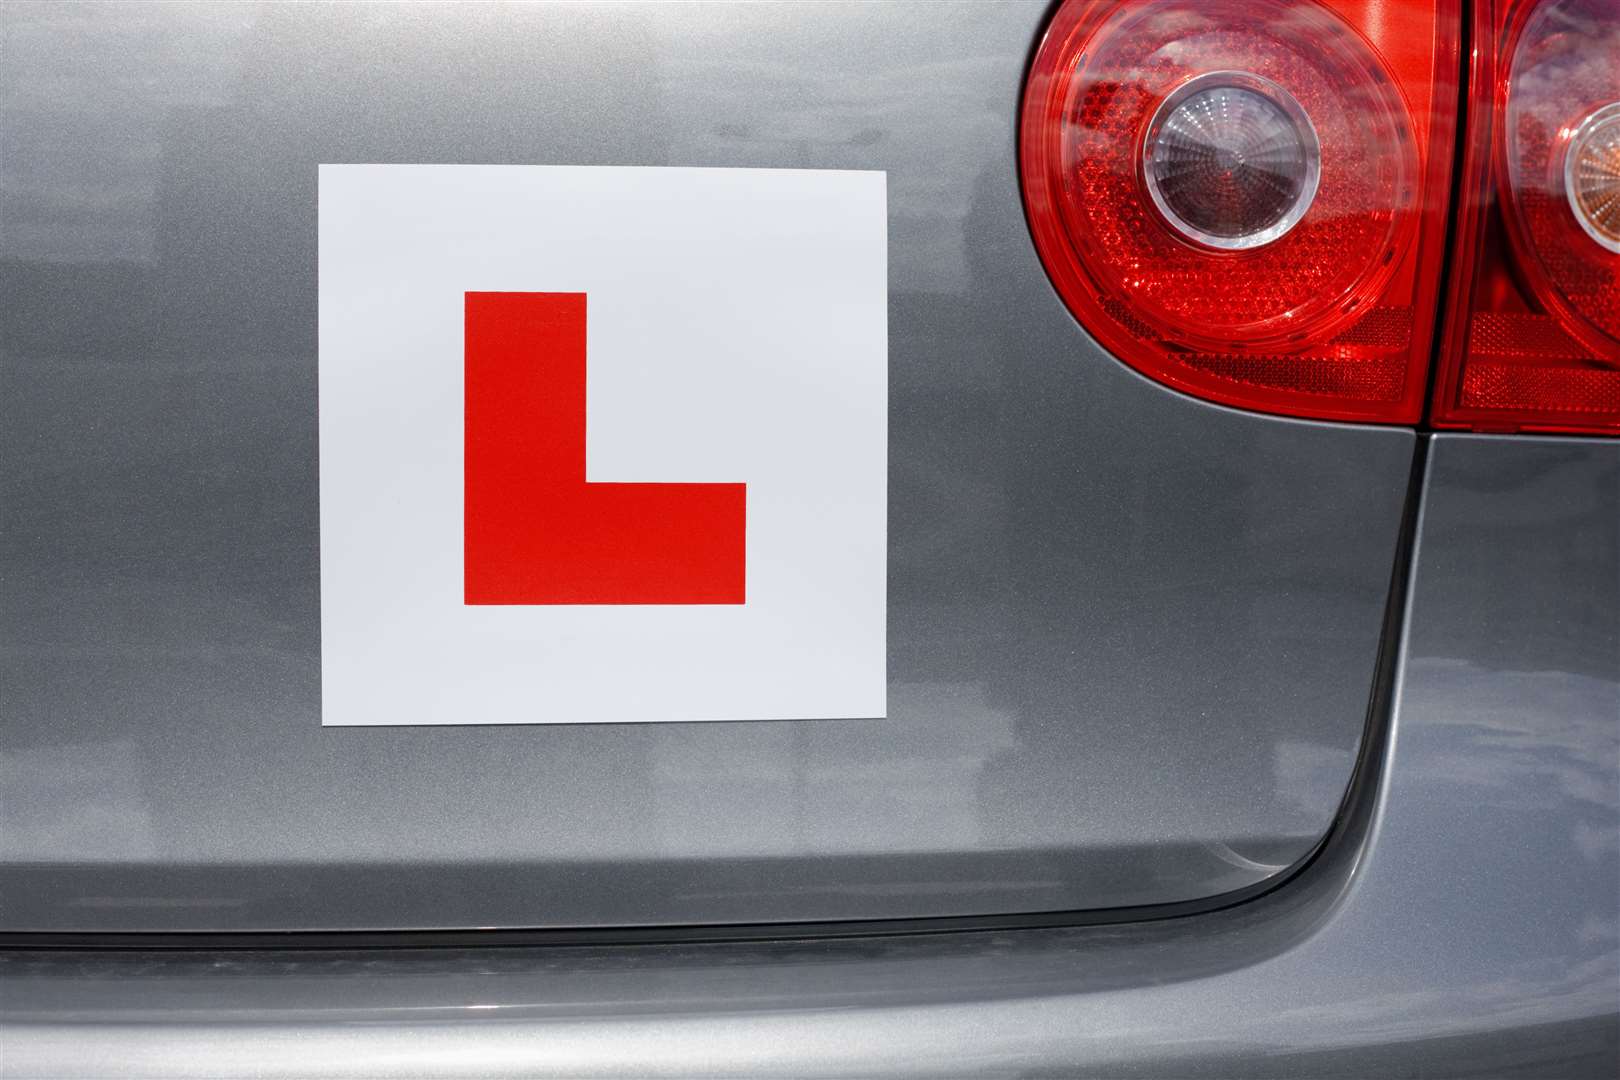 Online platform will allow learners to find the best deals for driving lessons